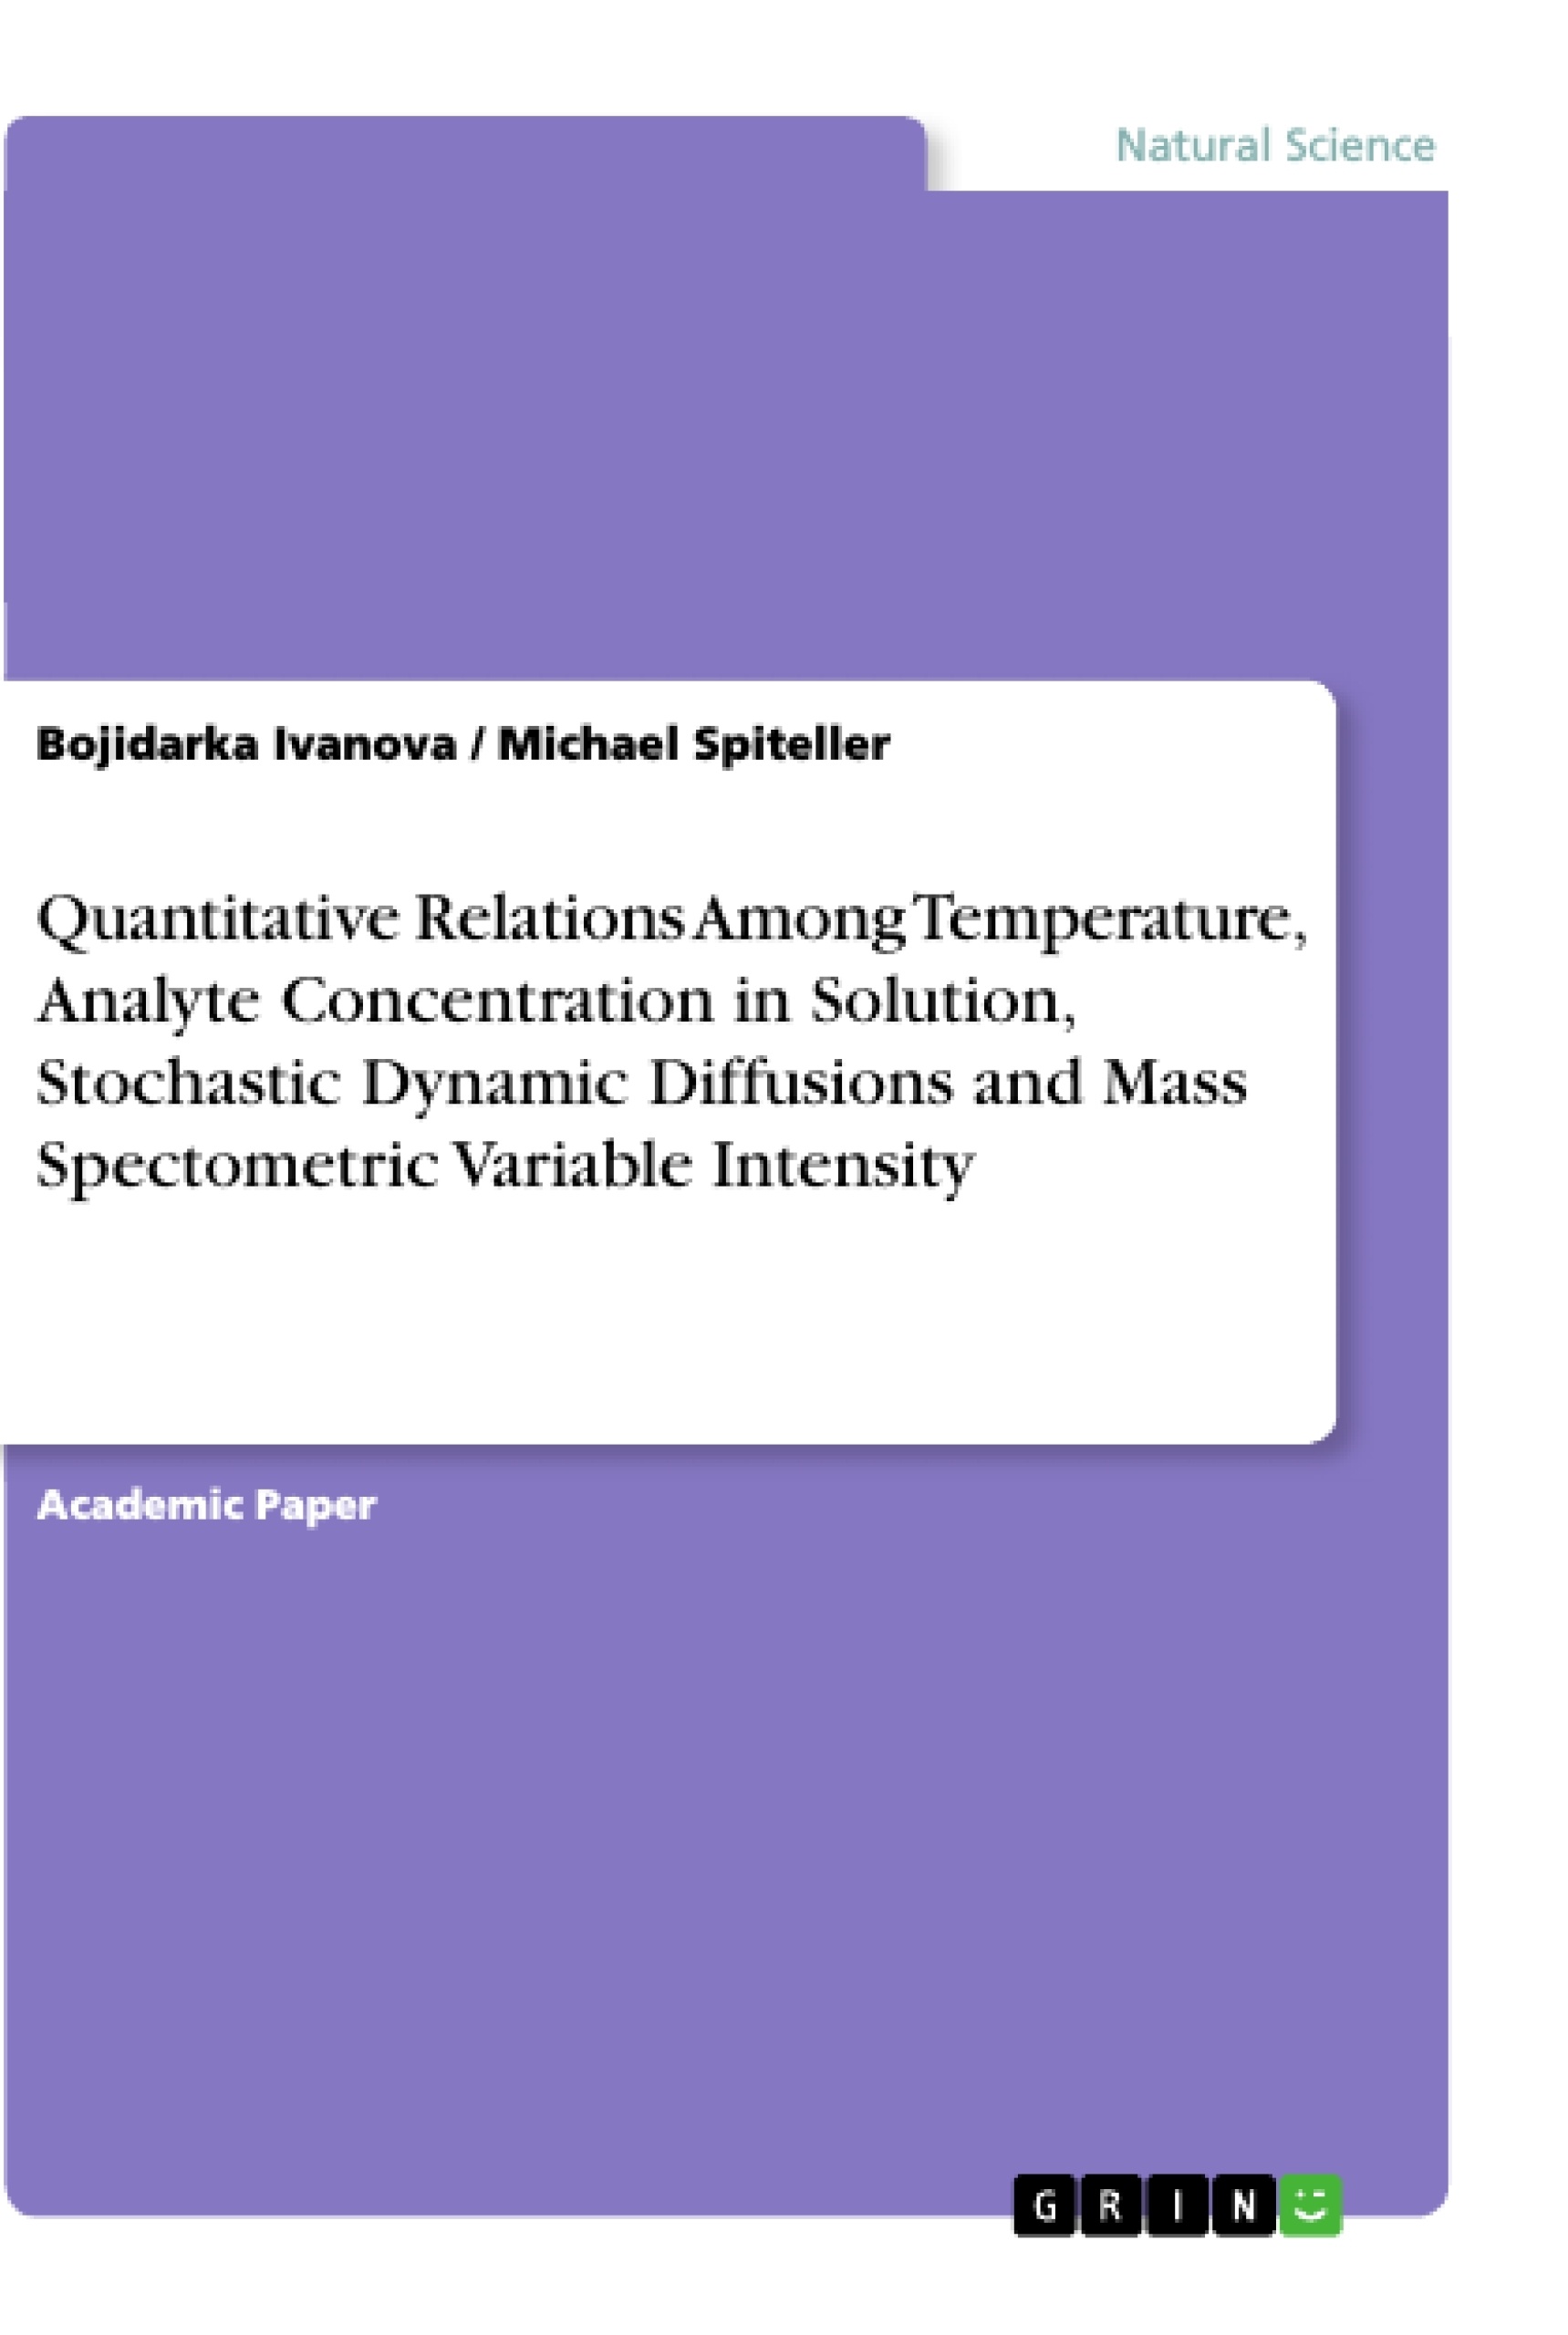 Title: Quantitative Relations Among Temperature, Analyte Concentration in Solution, Stochastic Dynamic Diffusions and Mass Spectometric Variable Intensity